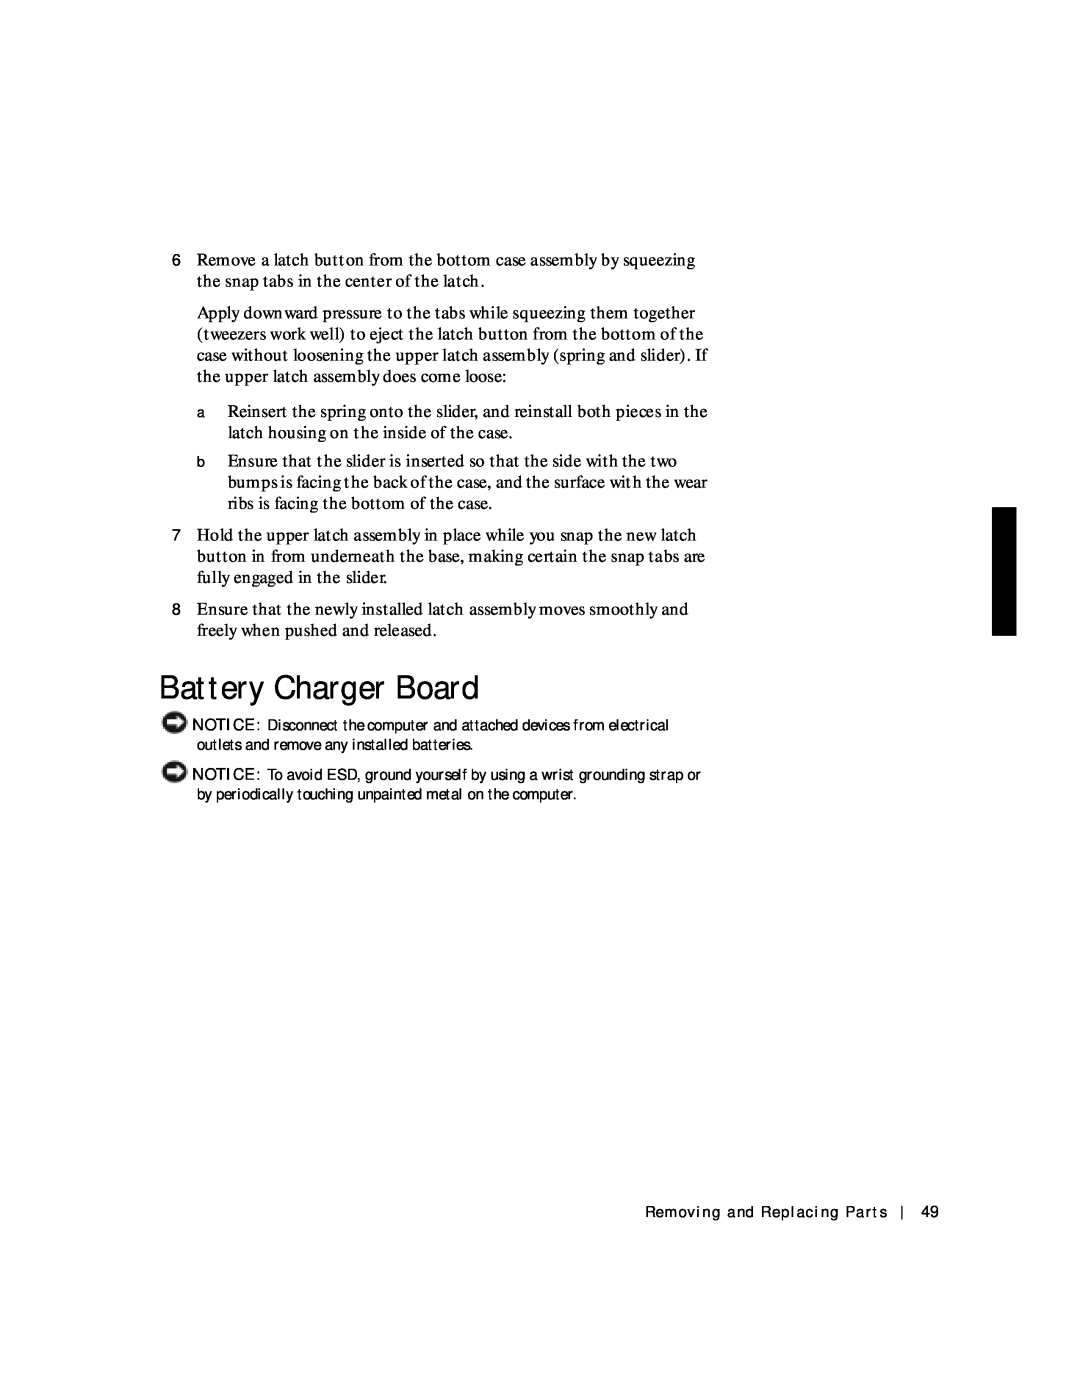 Applied Energy Products C800 service manual Battery Charger Board 